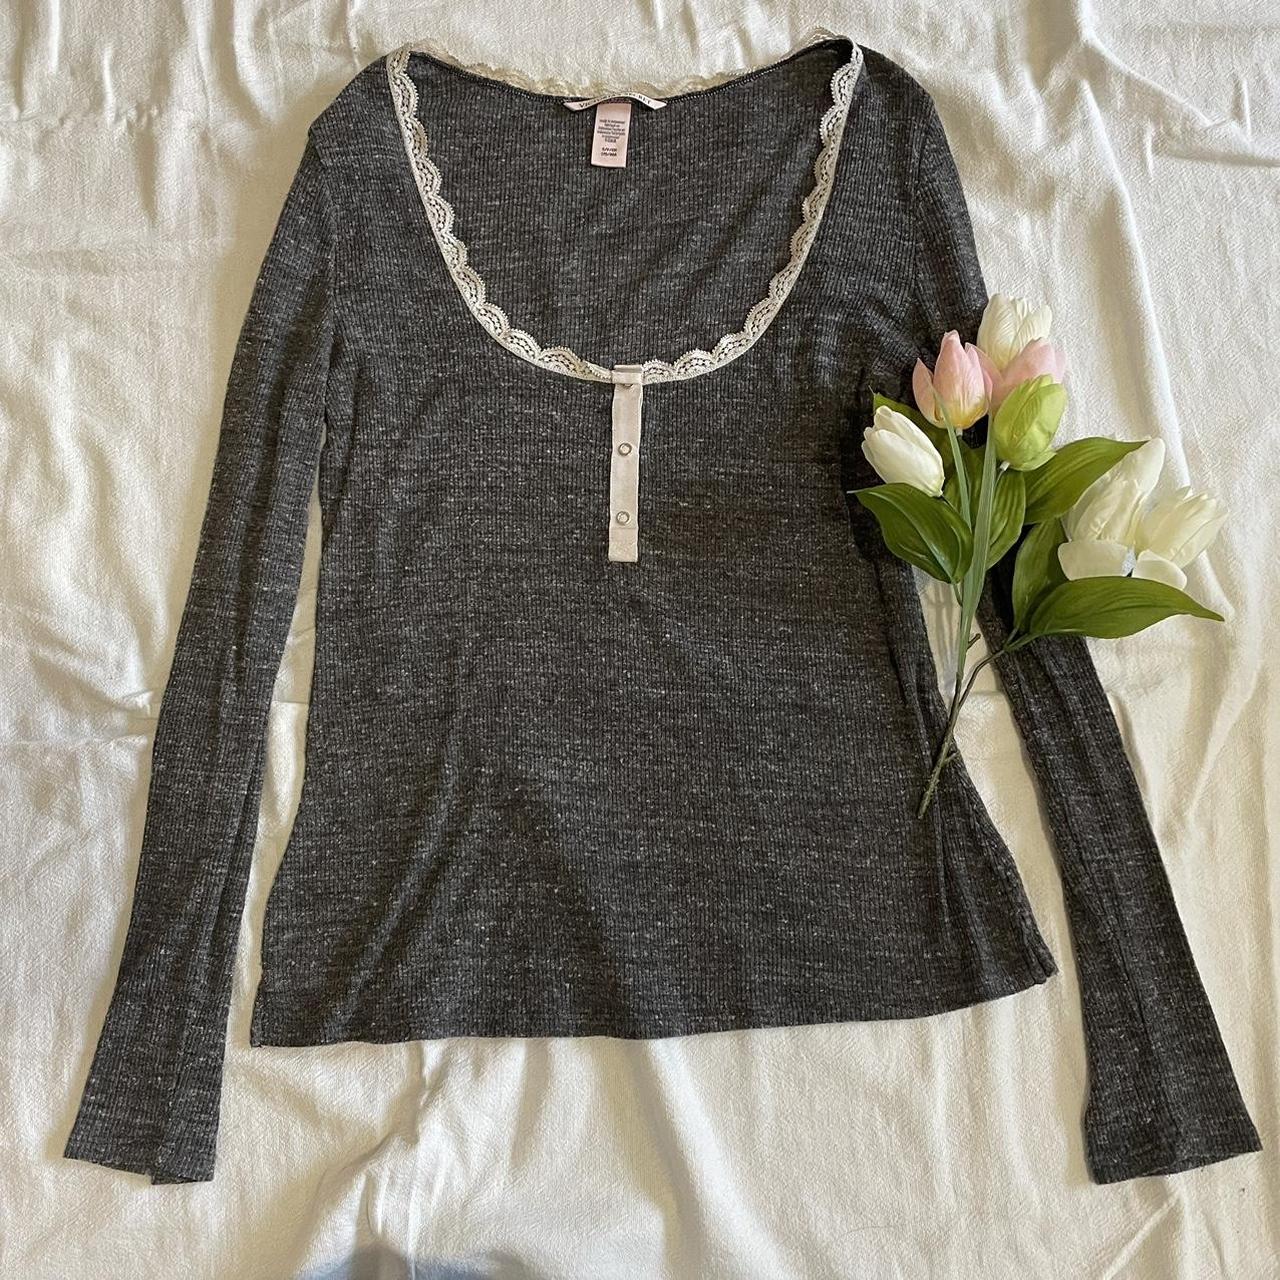 Adorable grey soft ribbed lace henley・₊ ~... - Depop